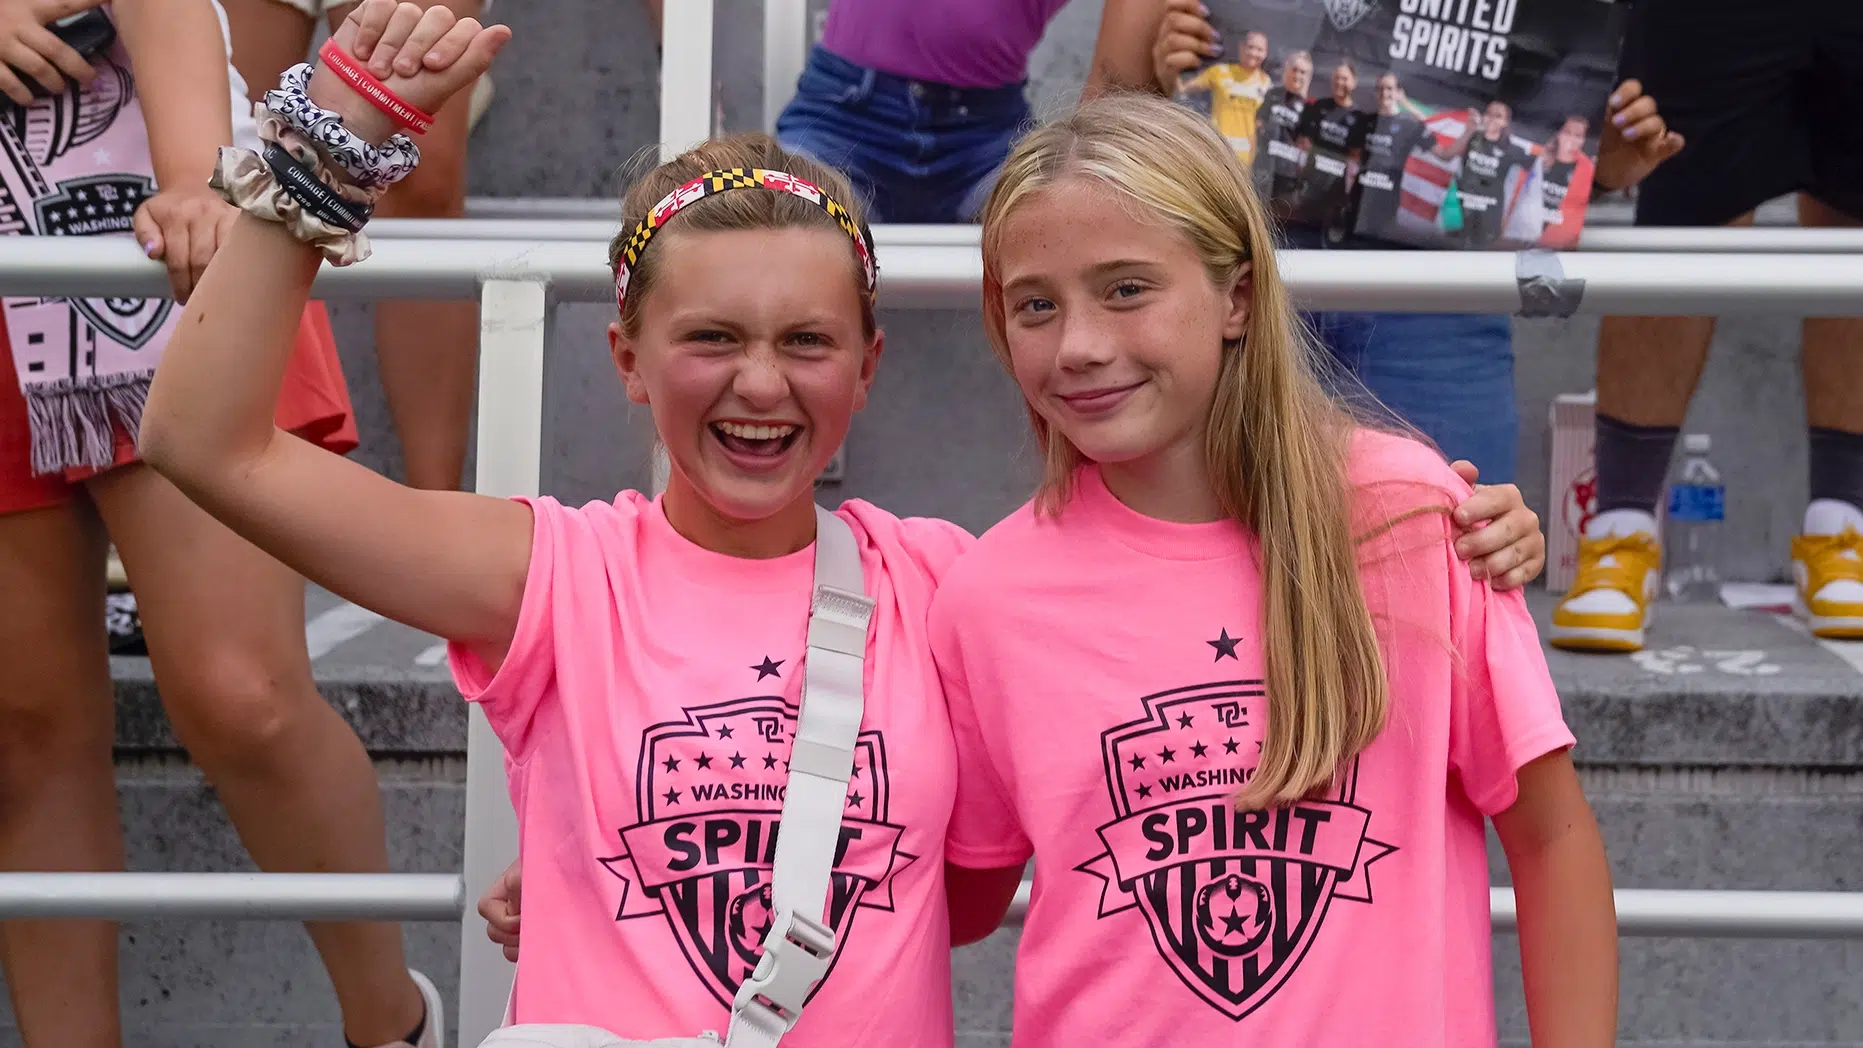 Two young girls cheer while wearing a pink t-shirt with a black Spirit crest.